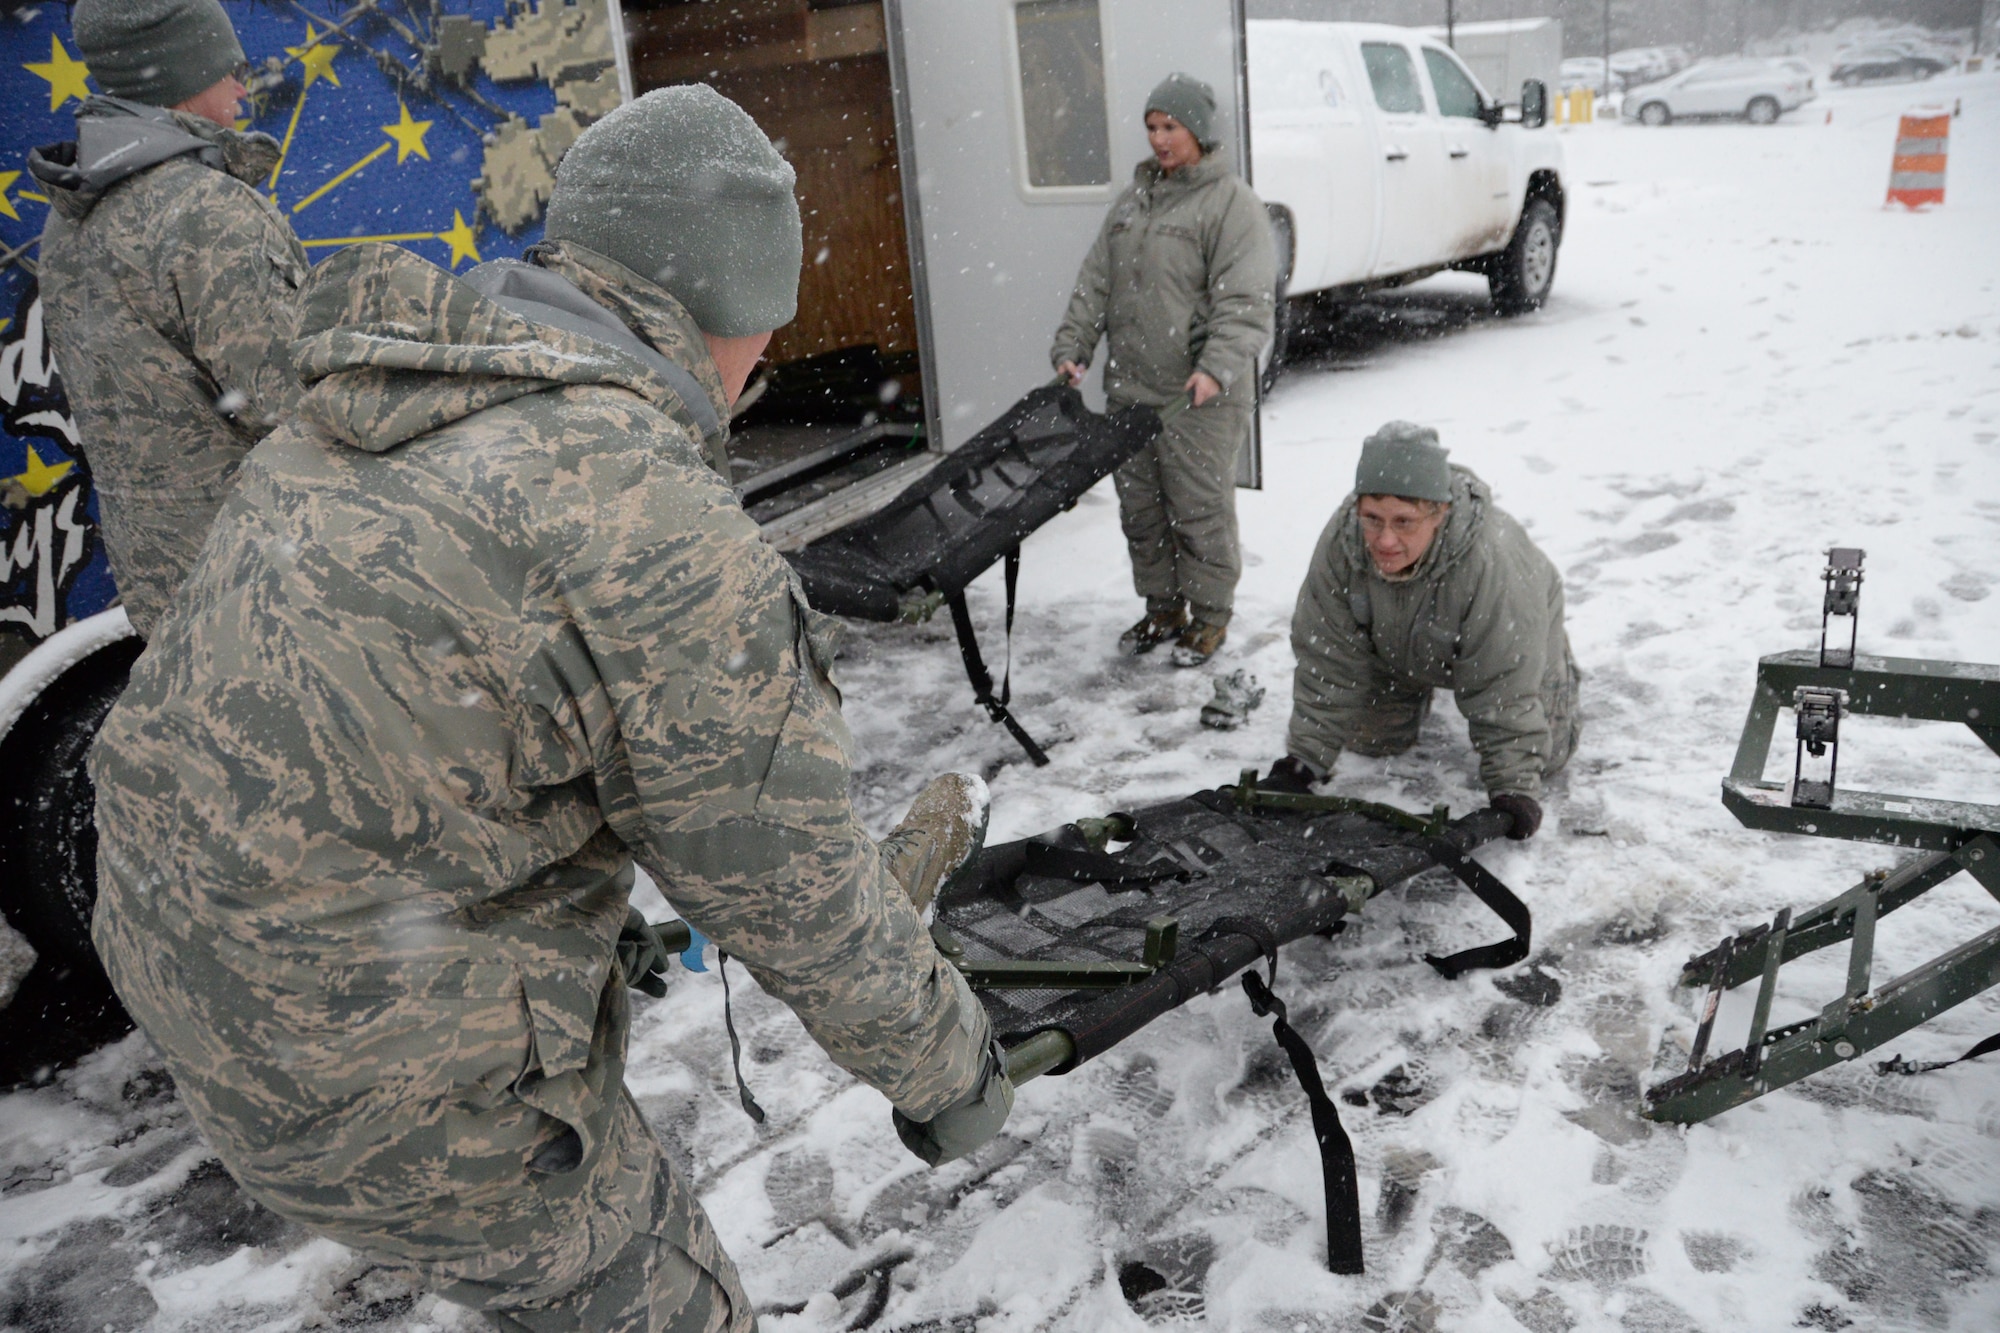 U.S. Air Force Airmen with the Indiana Air National Guard assigned to the 19th CBRNE Enhanced Response Force Package, 181st Intelligence Wing, assemble medical stretchers in preparation for a simulation treating victims outside of the Munson Healthcare Grayling Hospital in Grayling, Mich., April 6, 2016. (U.S. Air National Guard photo by Airman 1st Class Kevin D. Schulze)